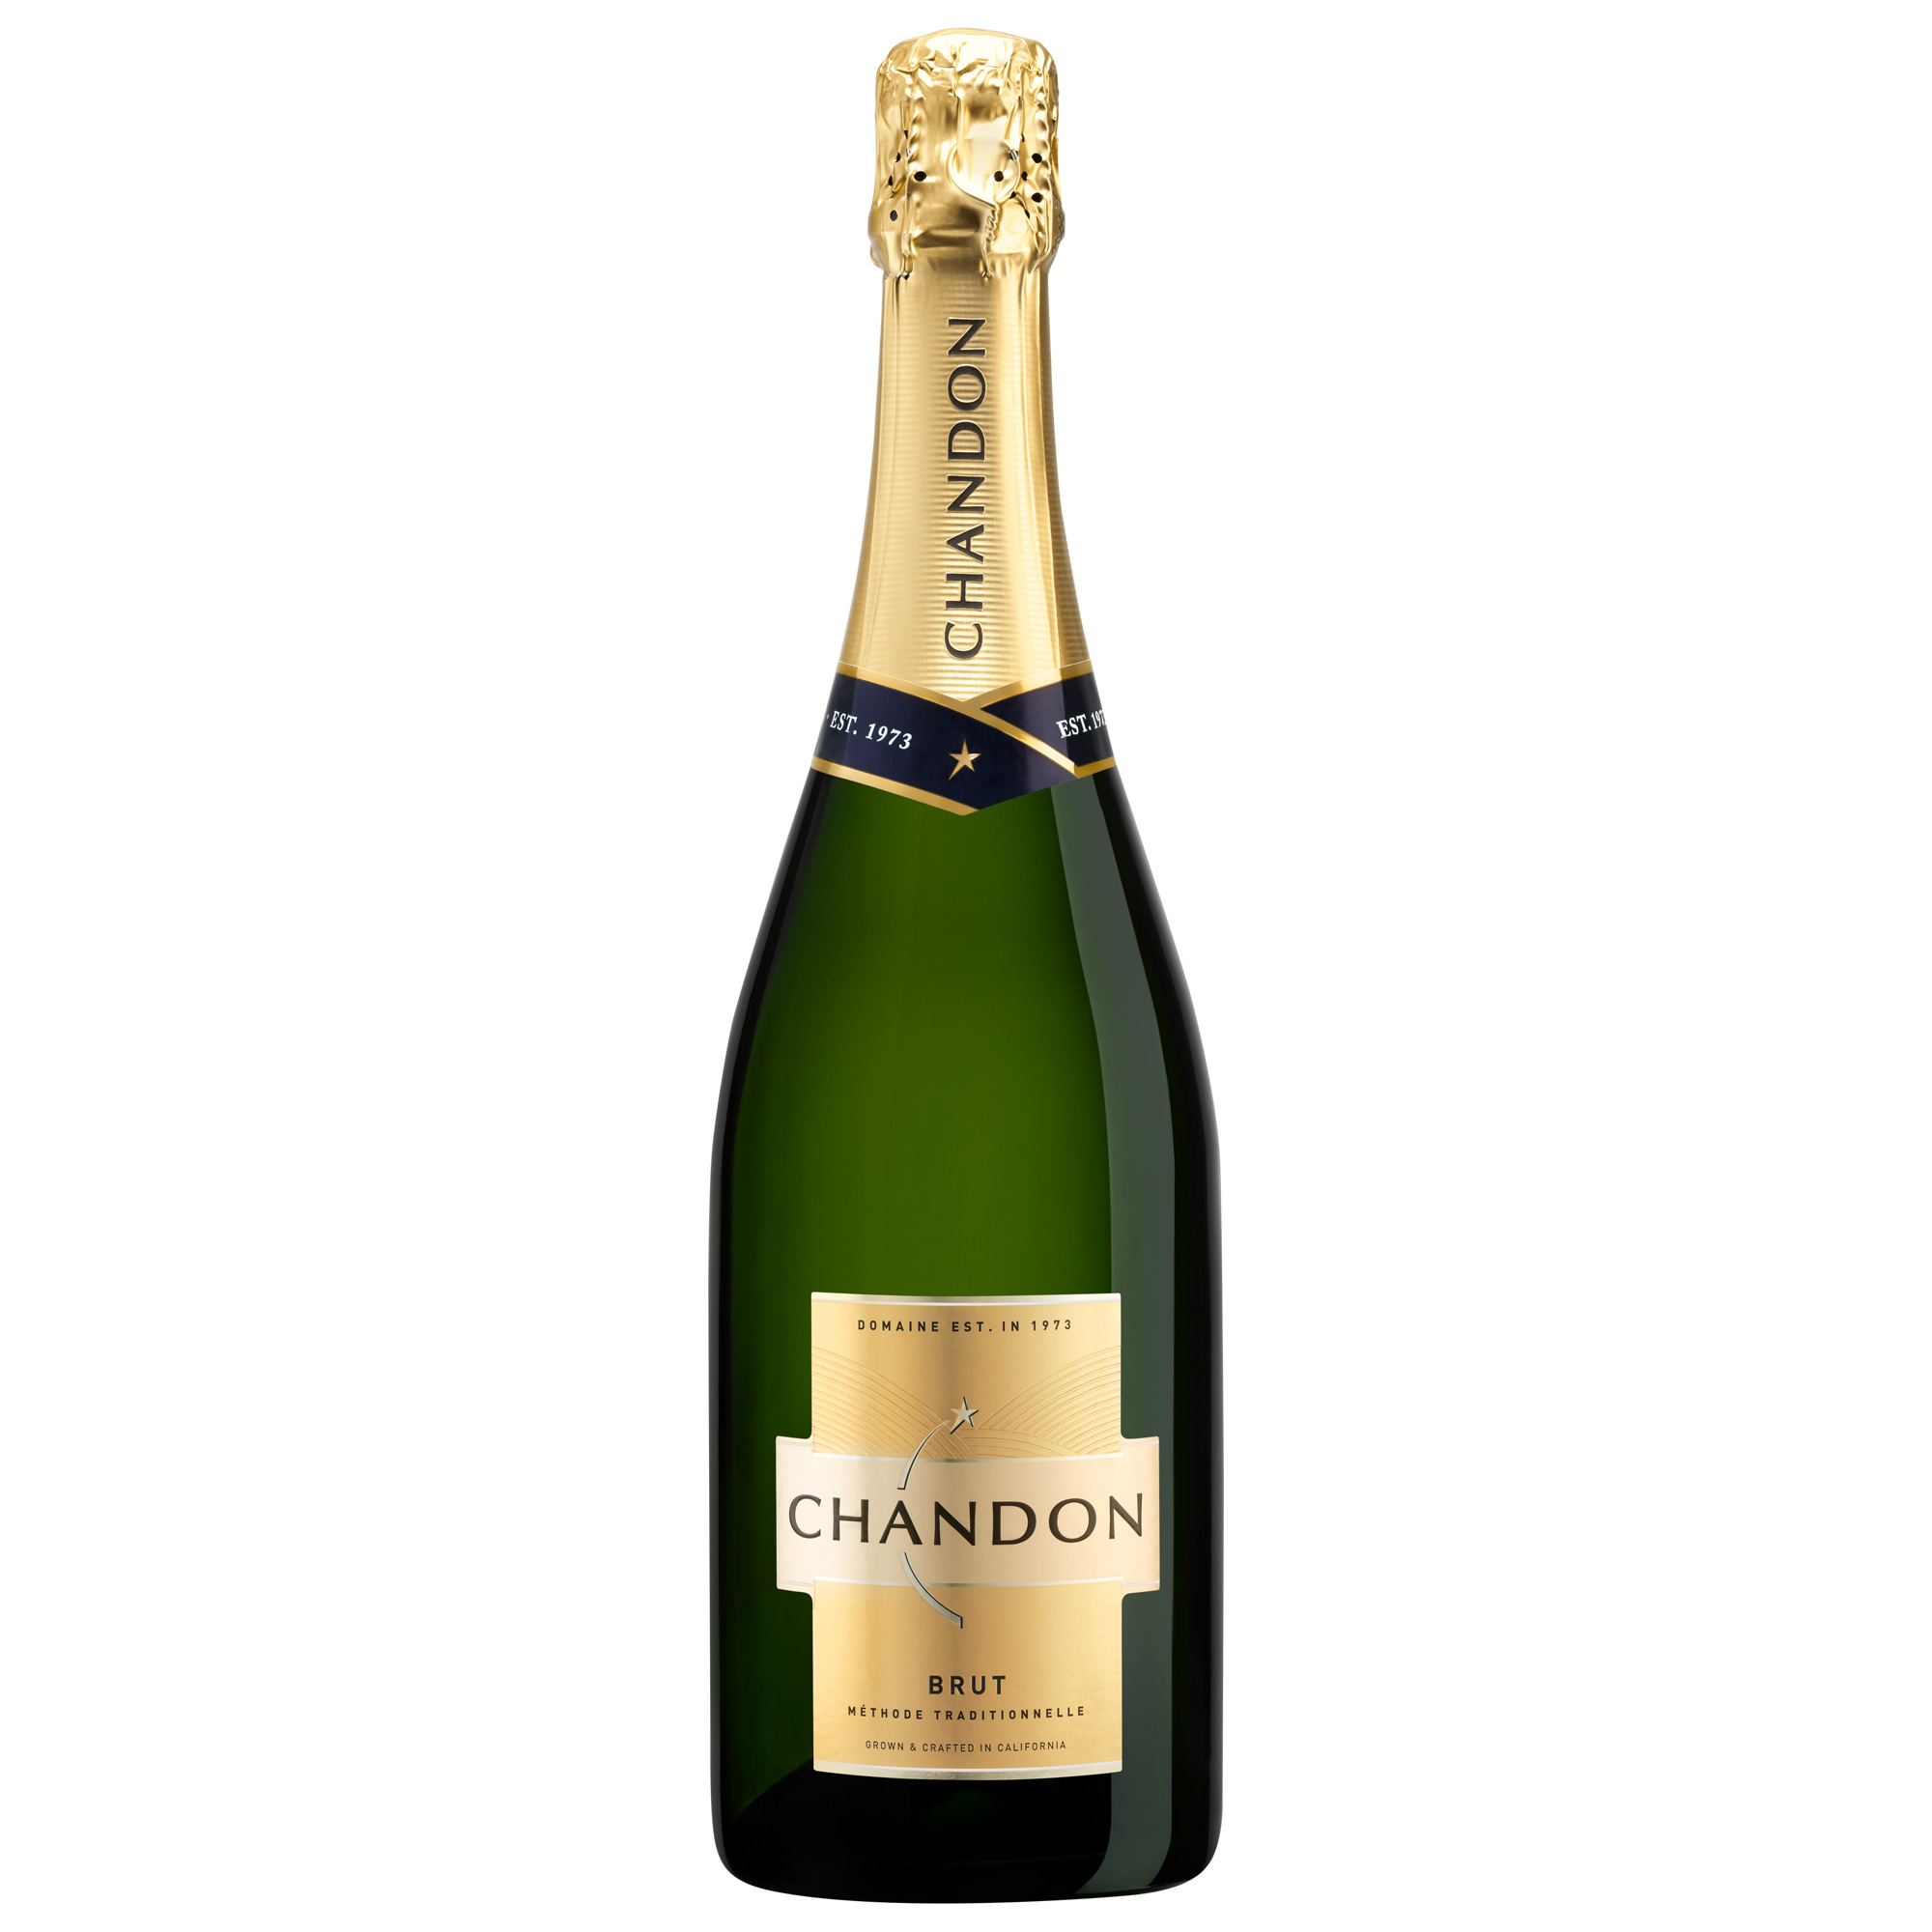 images/wine/ROSE and CHAMPAGNE/Chandon Brut.jpg